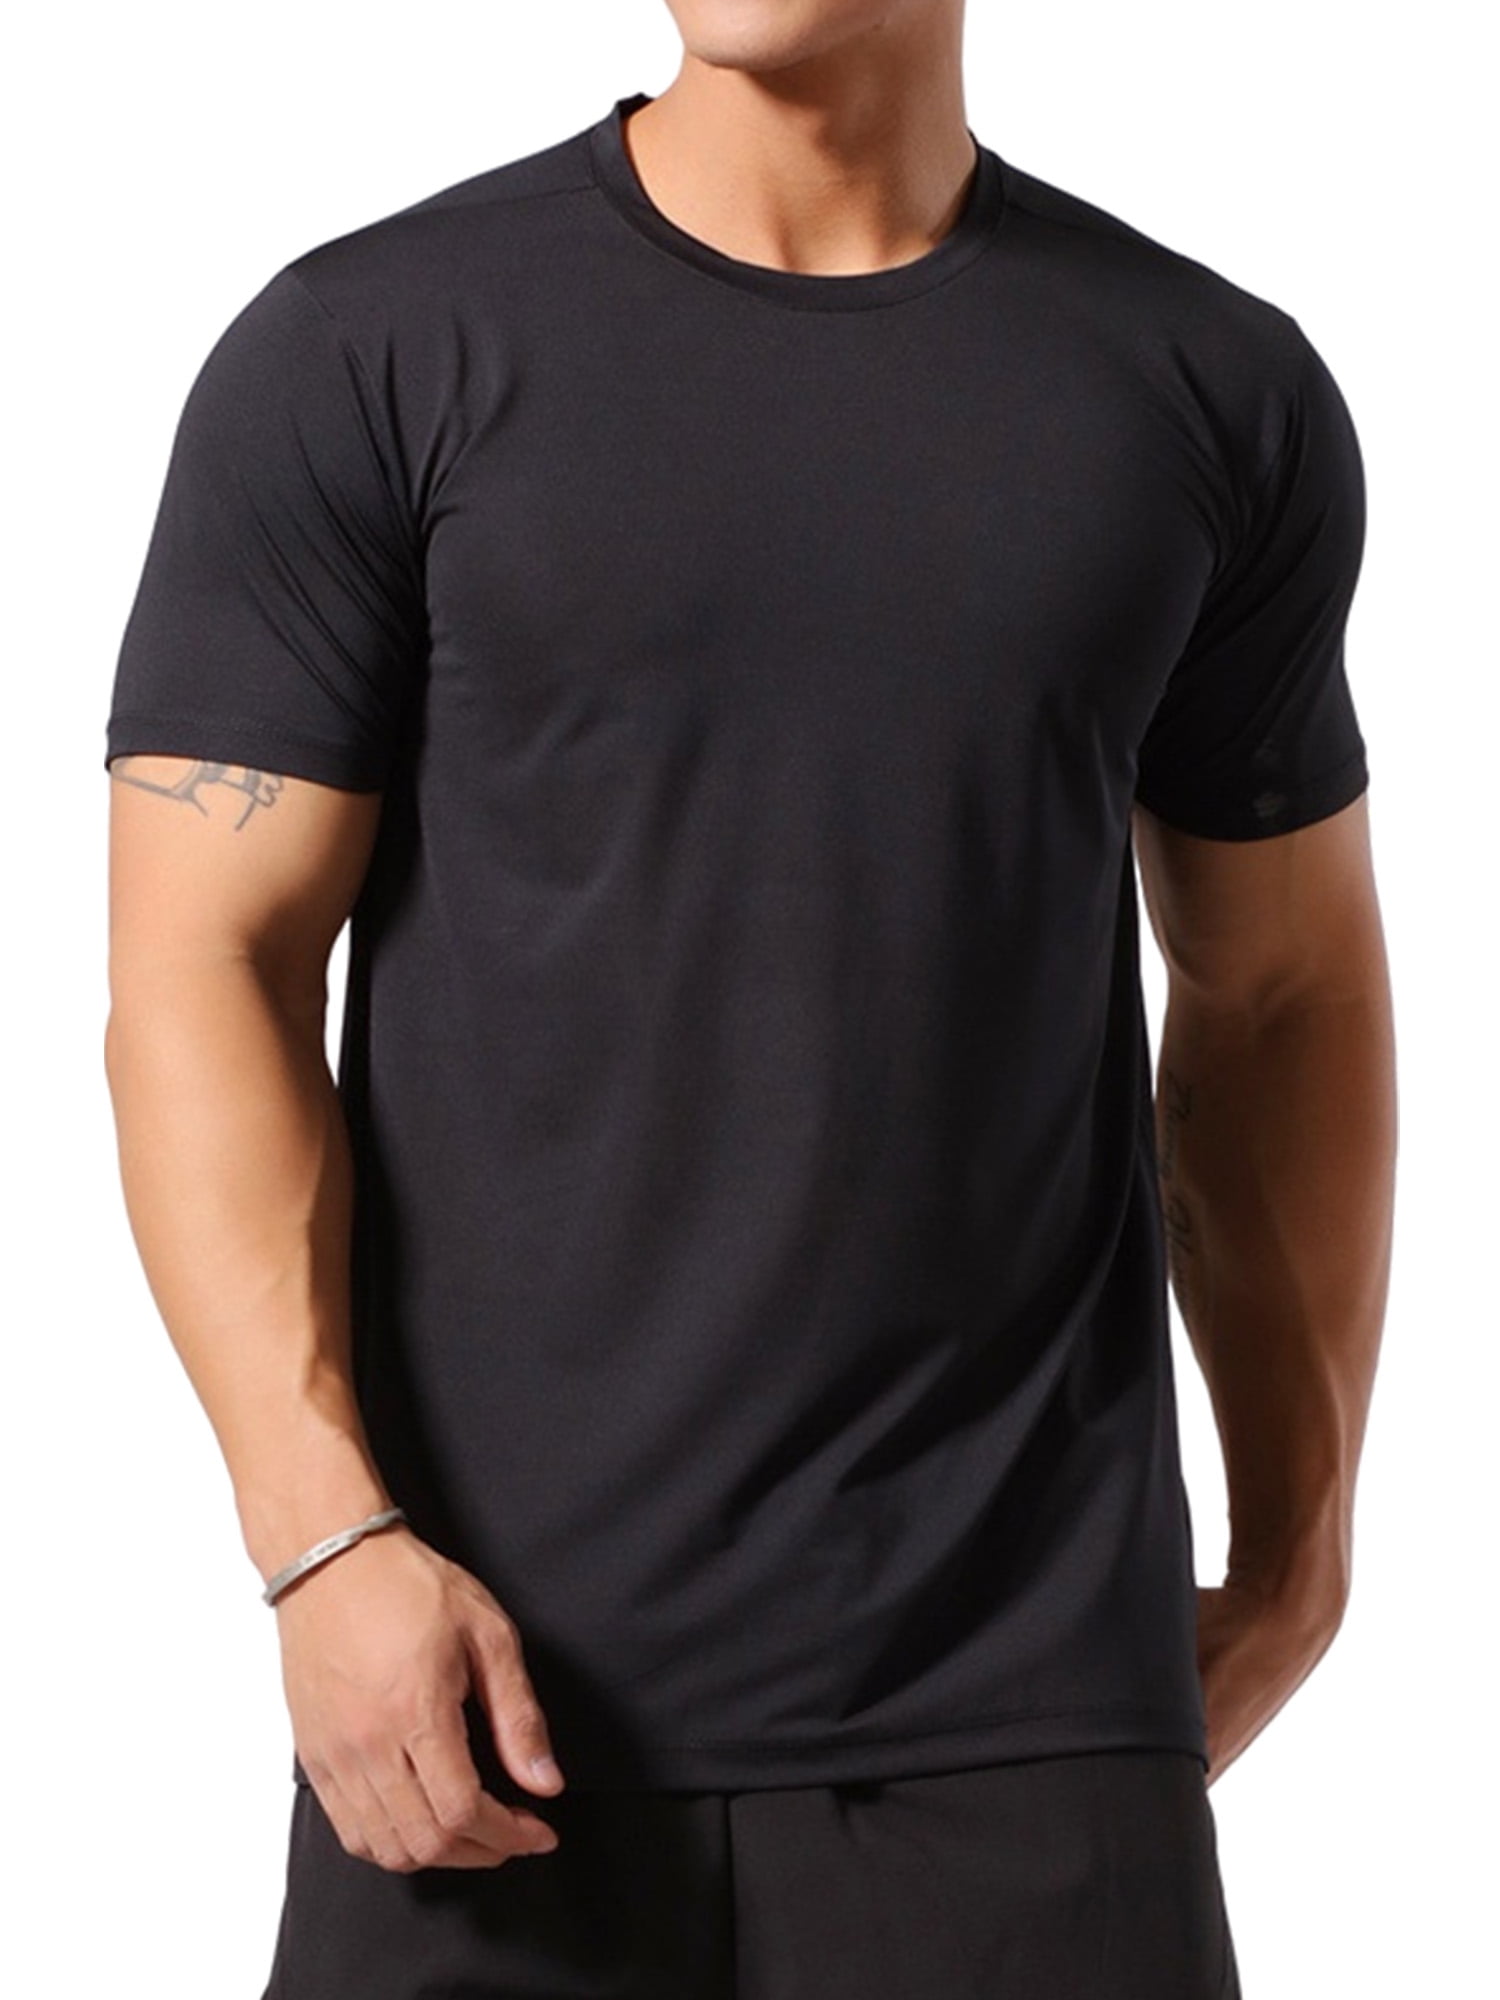 Details about   Gym King Men's T-Shirt Running Athletics Sportstyle Clothing Core Plus Dark Grey 